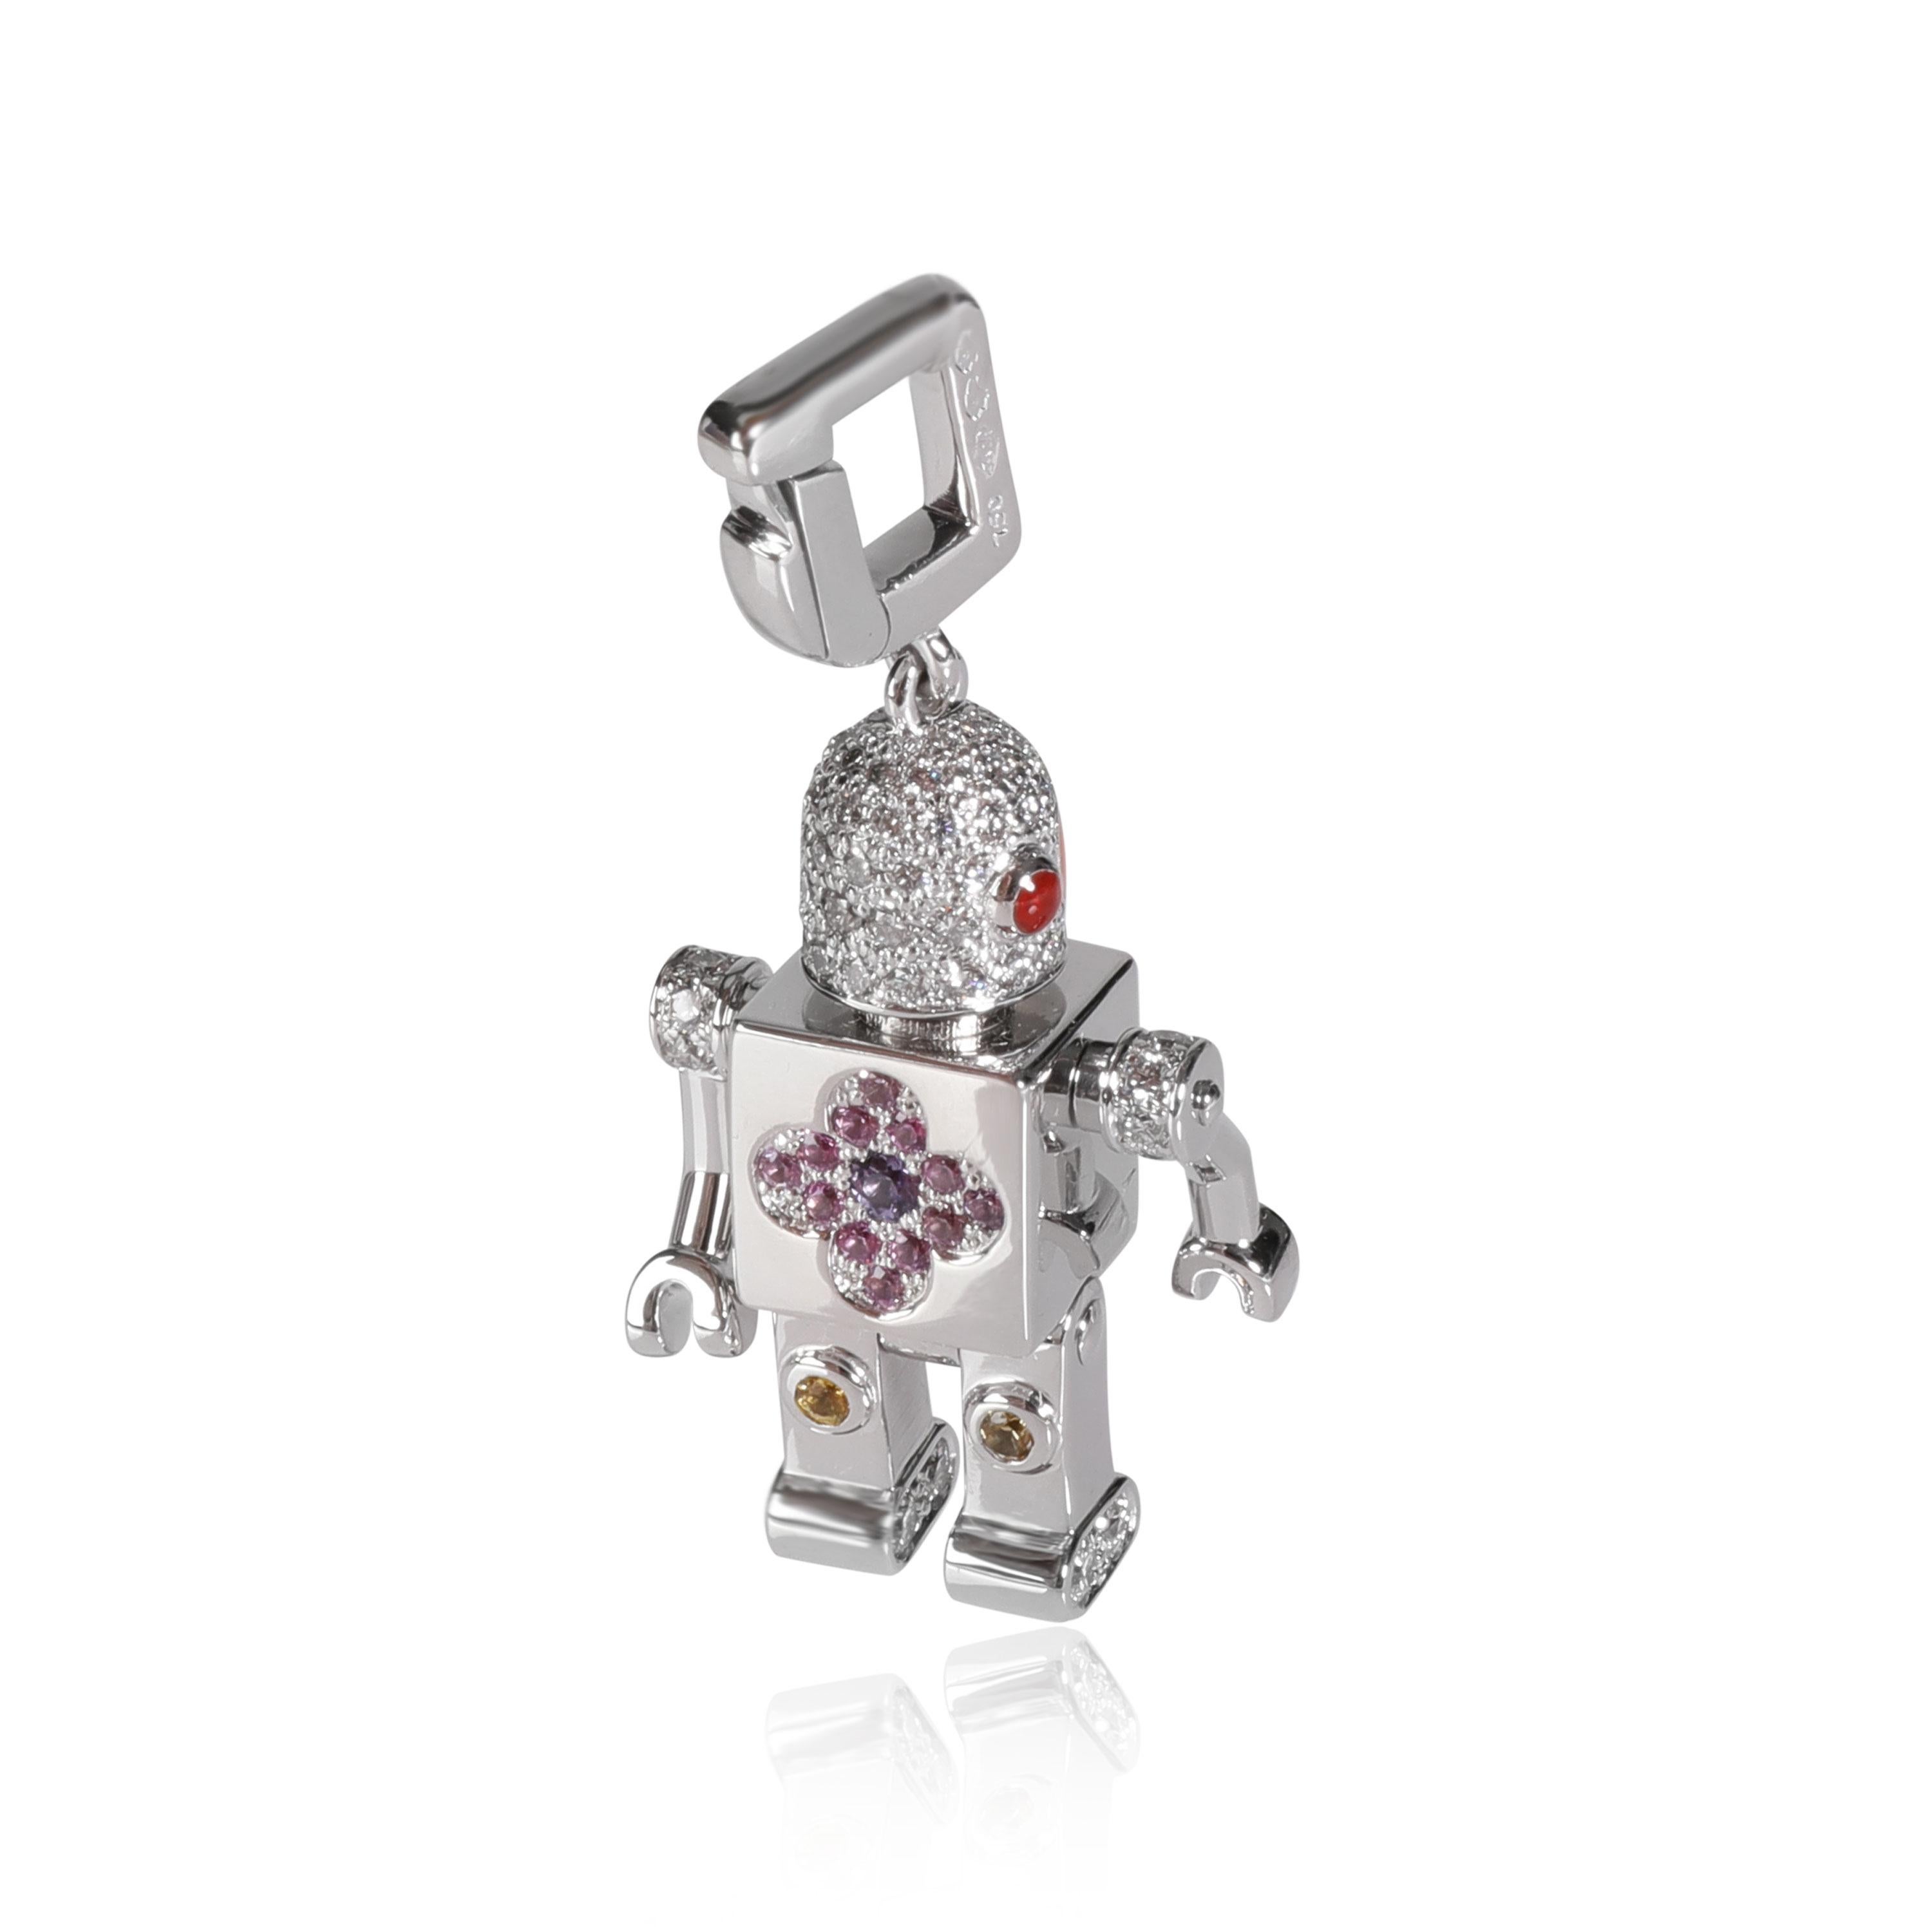 Louis Vuitton Spaceman Sapphire Diamond Charms in 18K White Gold 1.35 CTW

PRIMARY DETAILS
SKU: 114660
Listing Title: Louis Vuitton Spaceman Sapphire Diamond Charms in 18K White Gold 1.35 CTW
Condition Description: Retails for 17,900 USD. In